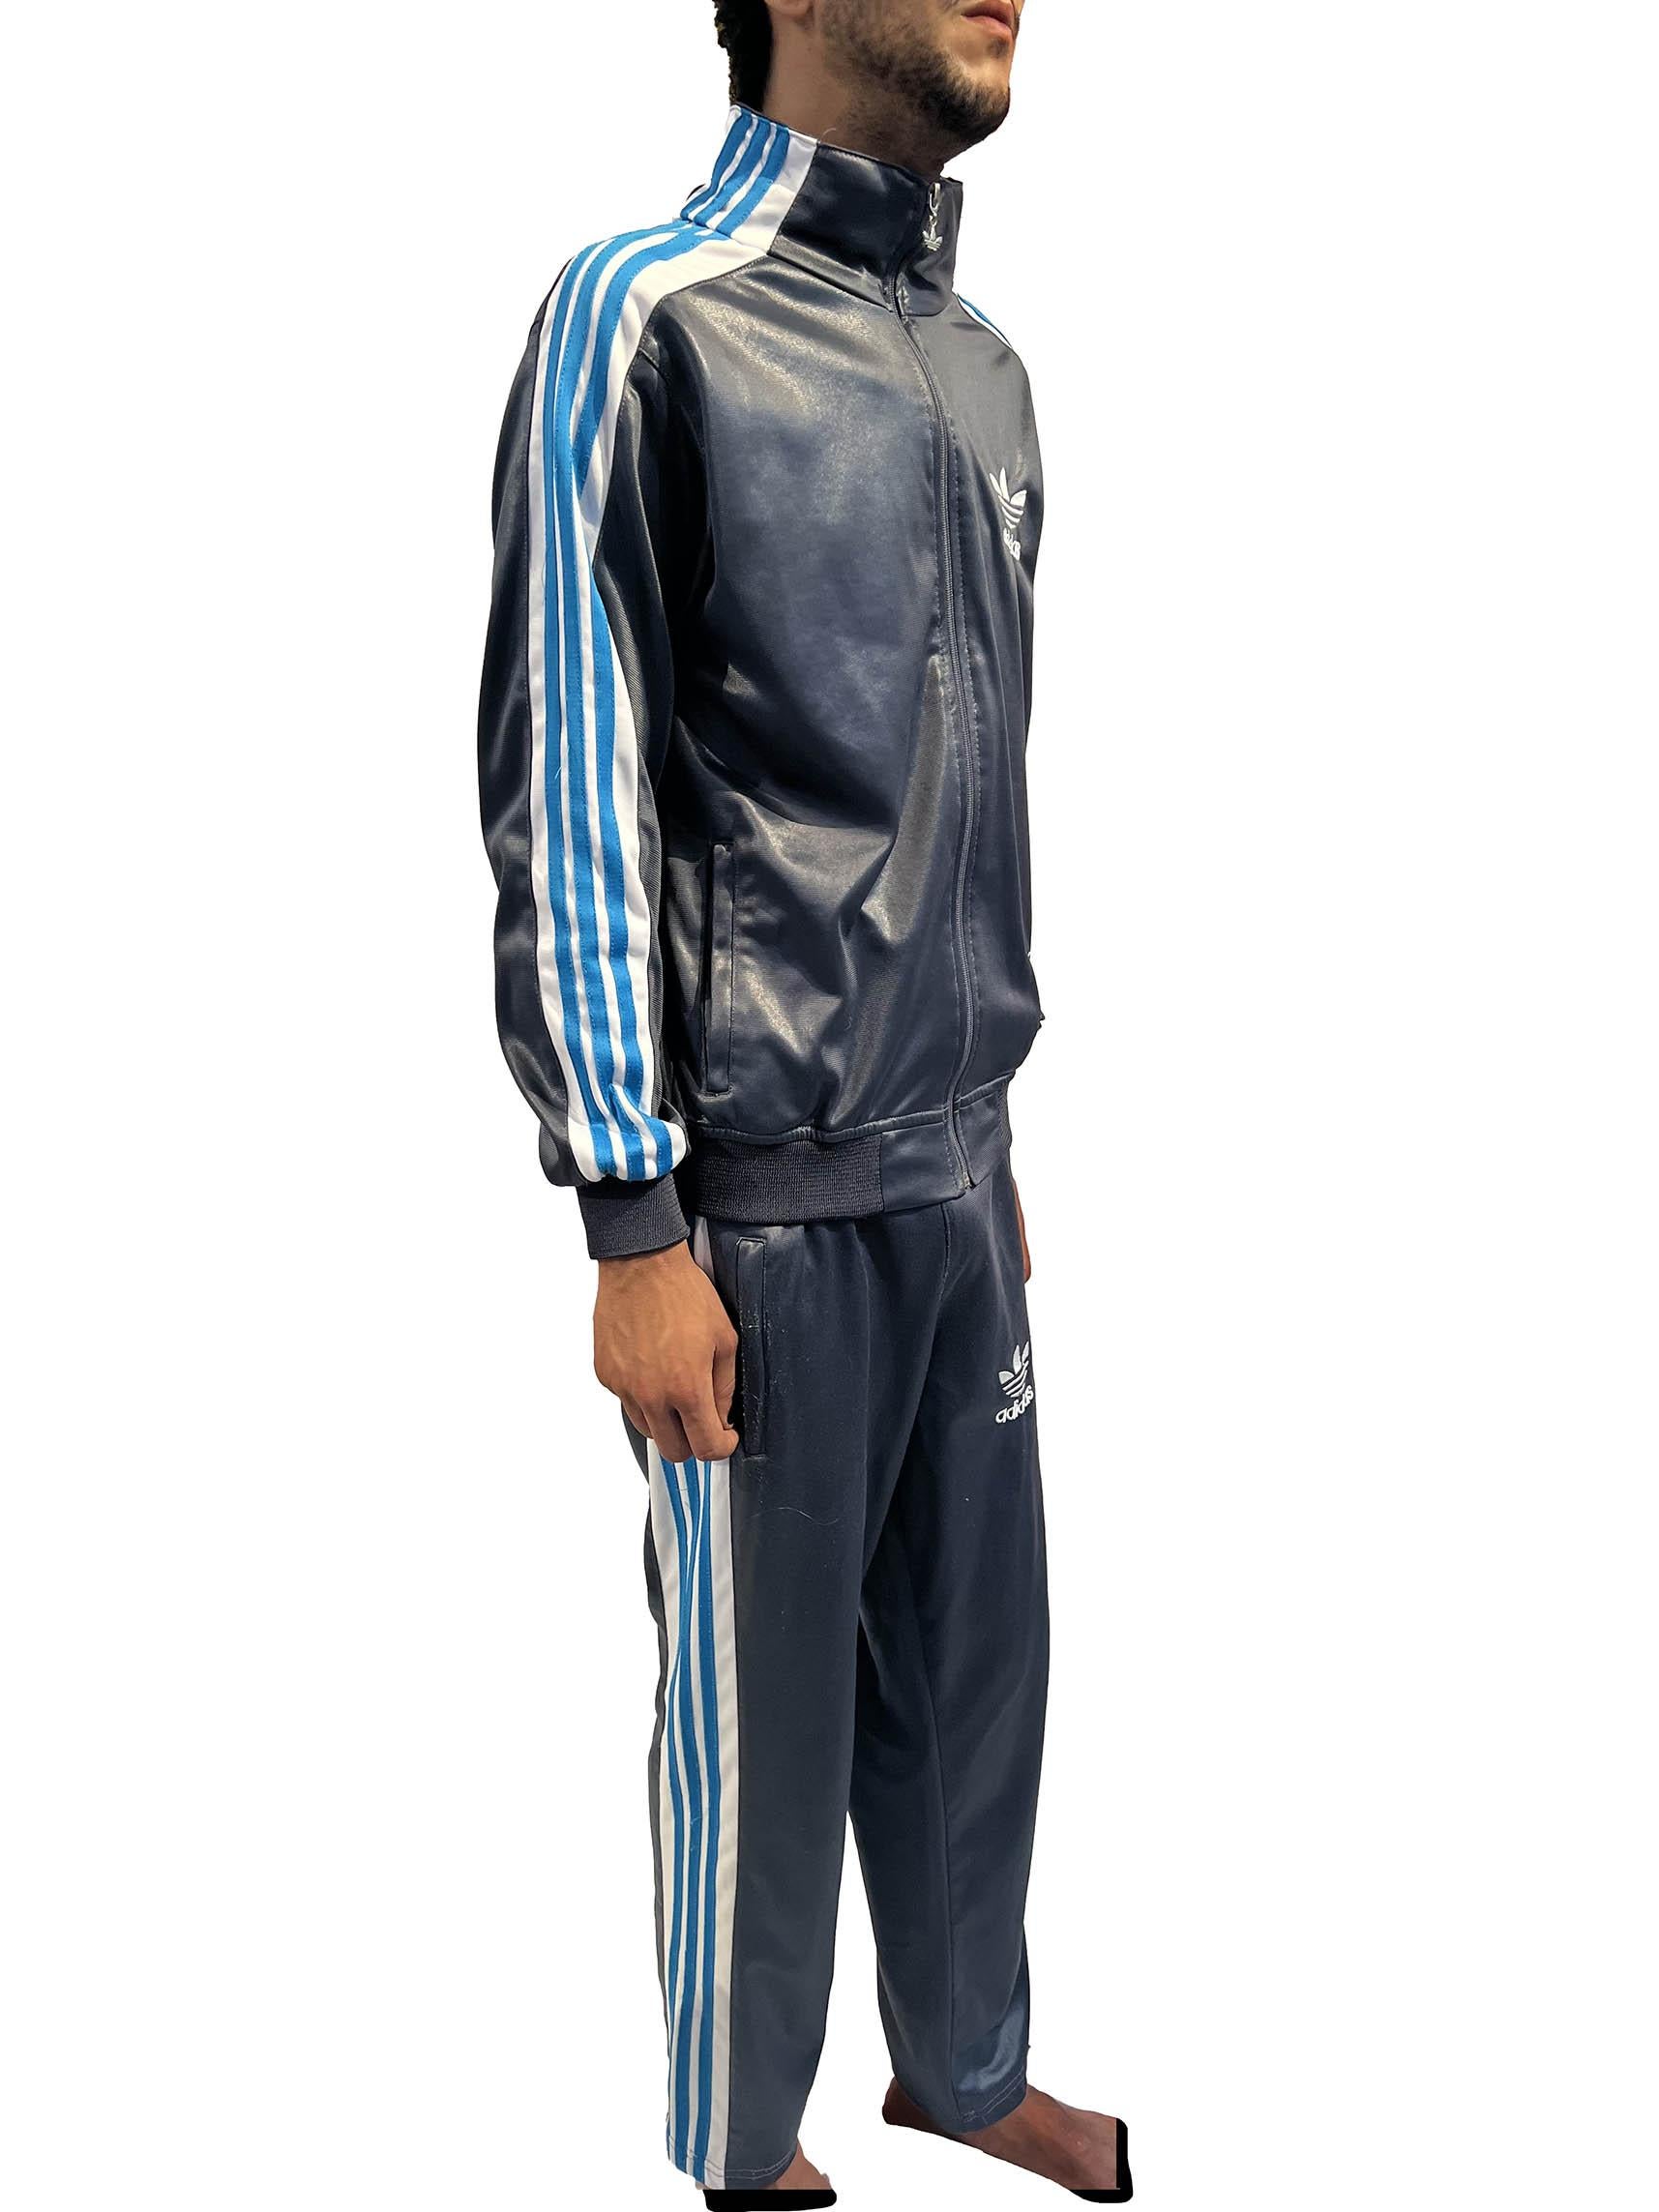 Women's or Men's 1980S Adidas Grey & Blue Polyester Stretchy Rare Chile 62' Pant Suit For Sale